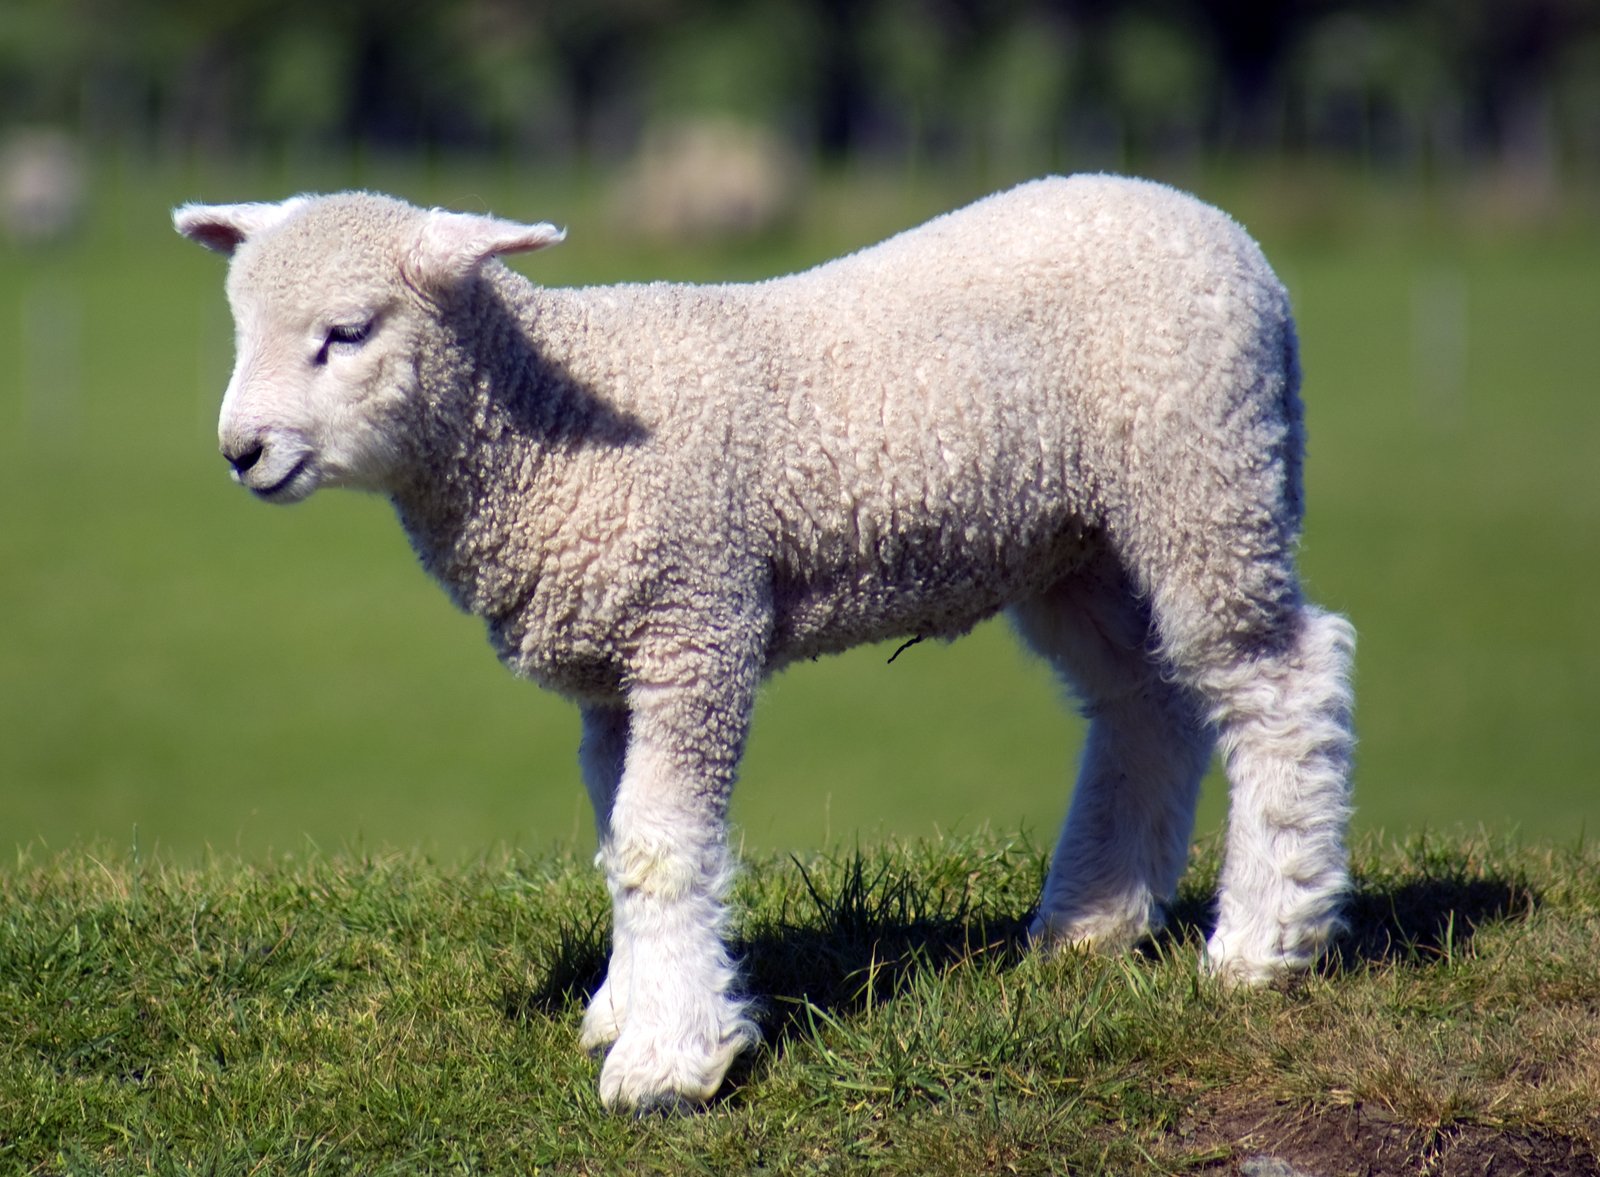 a white sheep standing in a grassy field